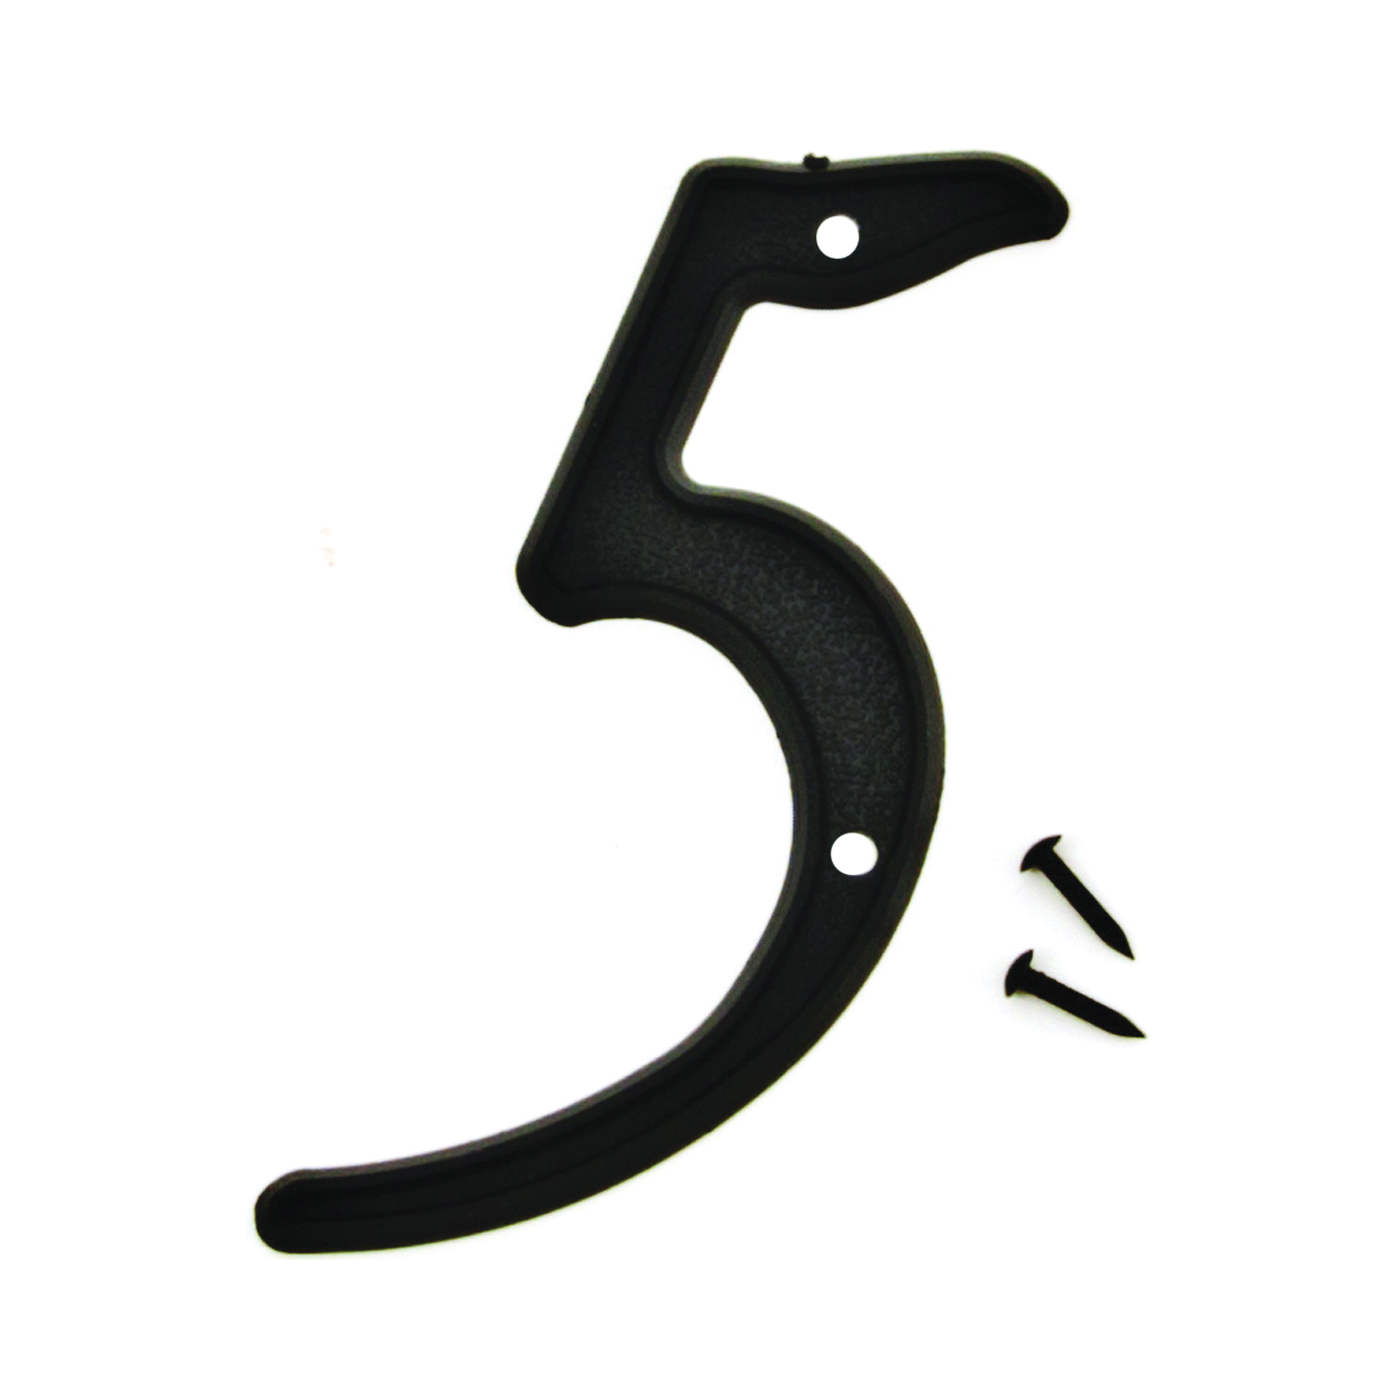 PN-29/5 House Number, Character: 5, 4 in H Character, Black Character, Plastic